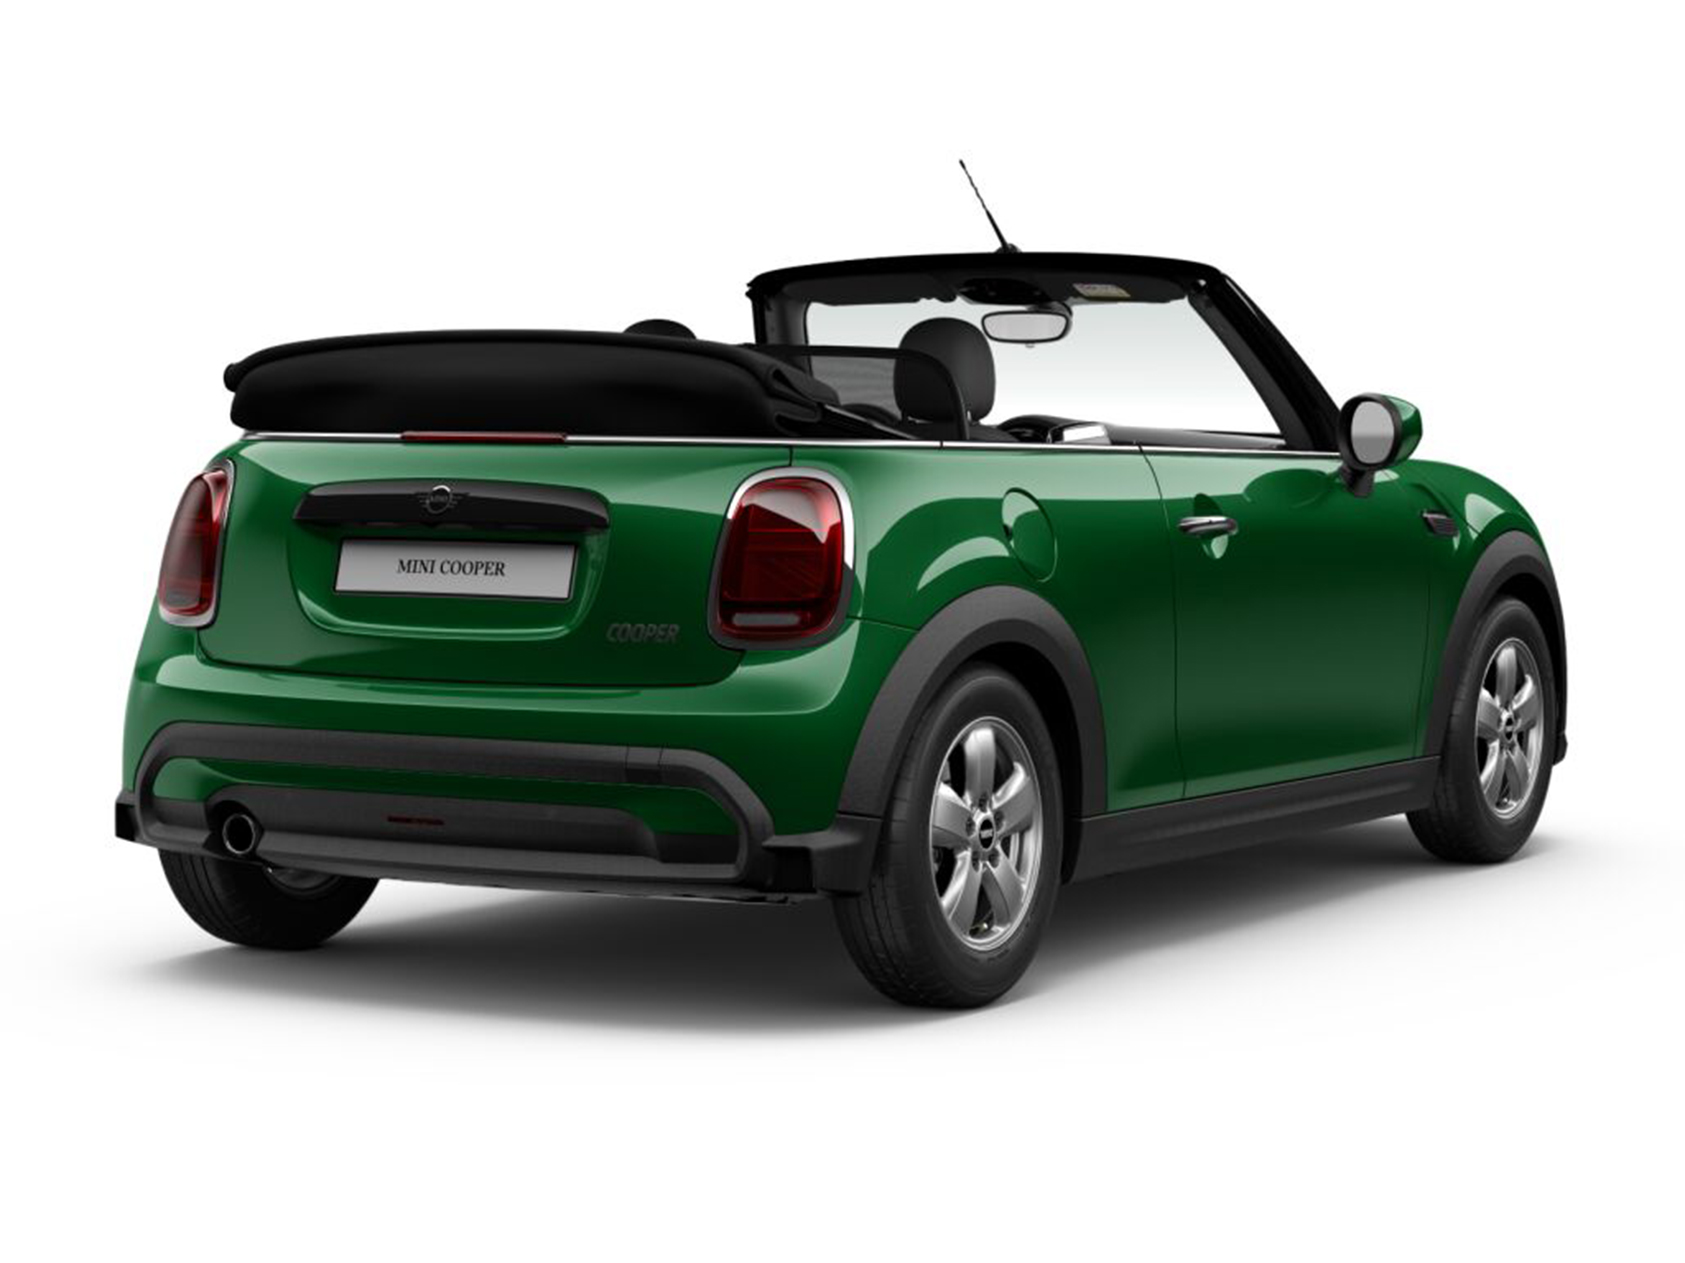 MINI Convertible Cars For Sale | AutoTrader UK